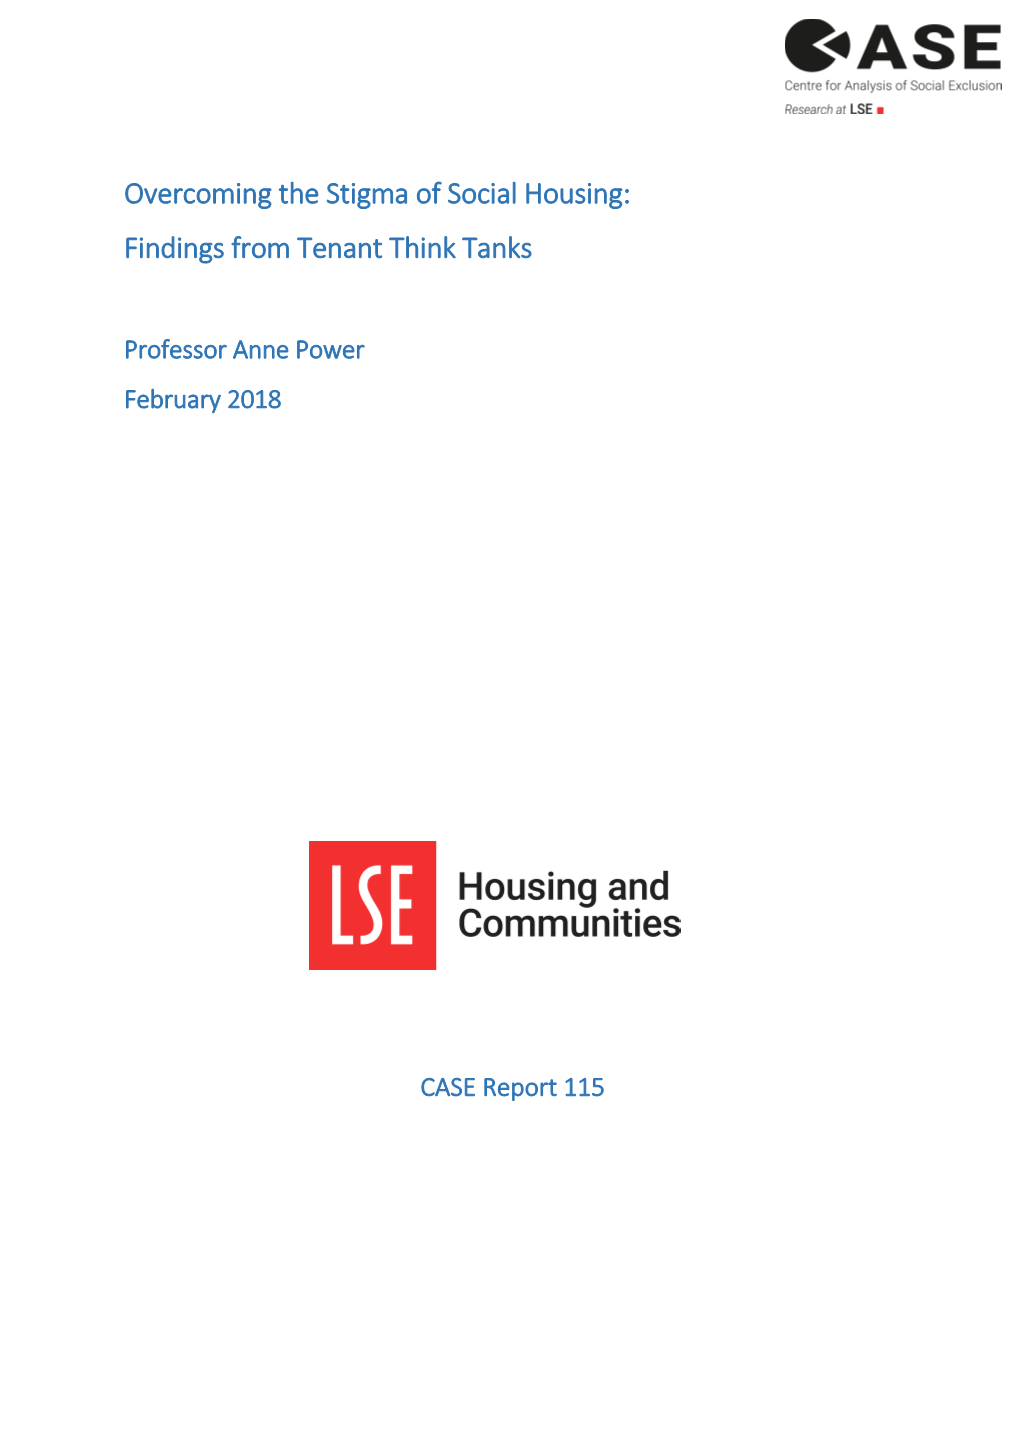 Overcoming the Stigma of Social Housing: Findings from Tenant Think Tanks